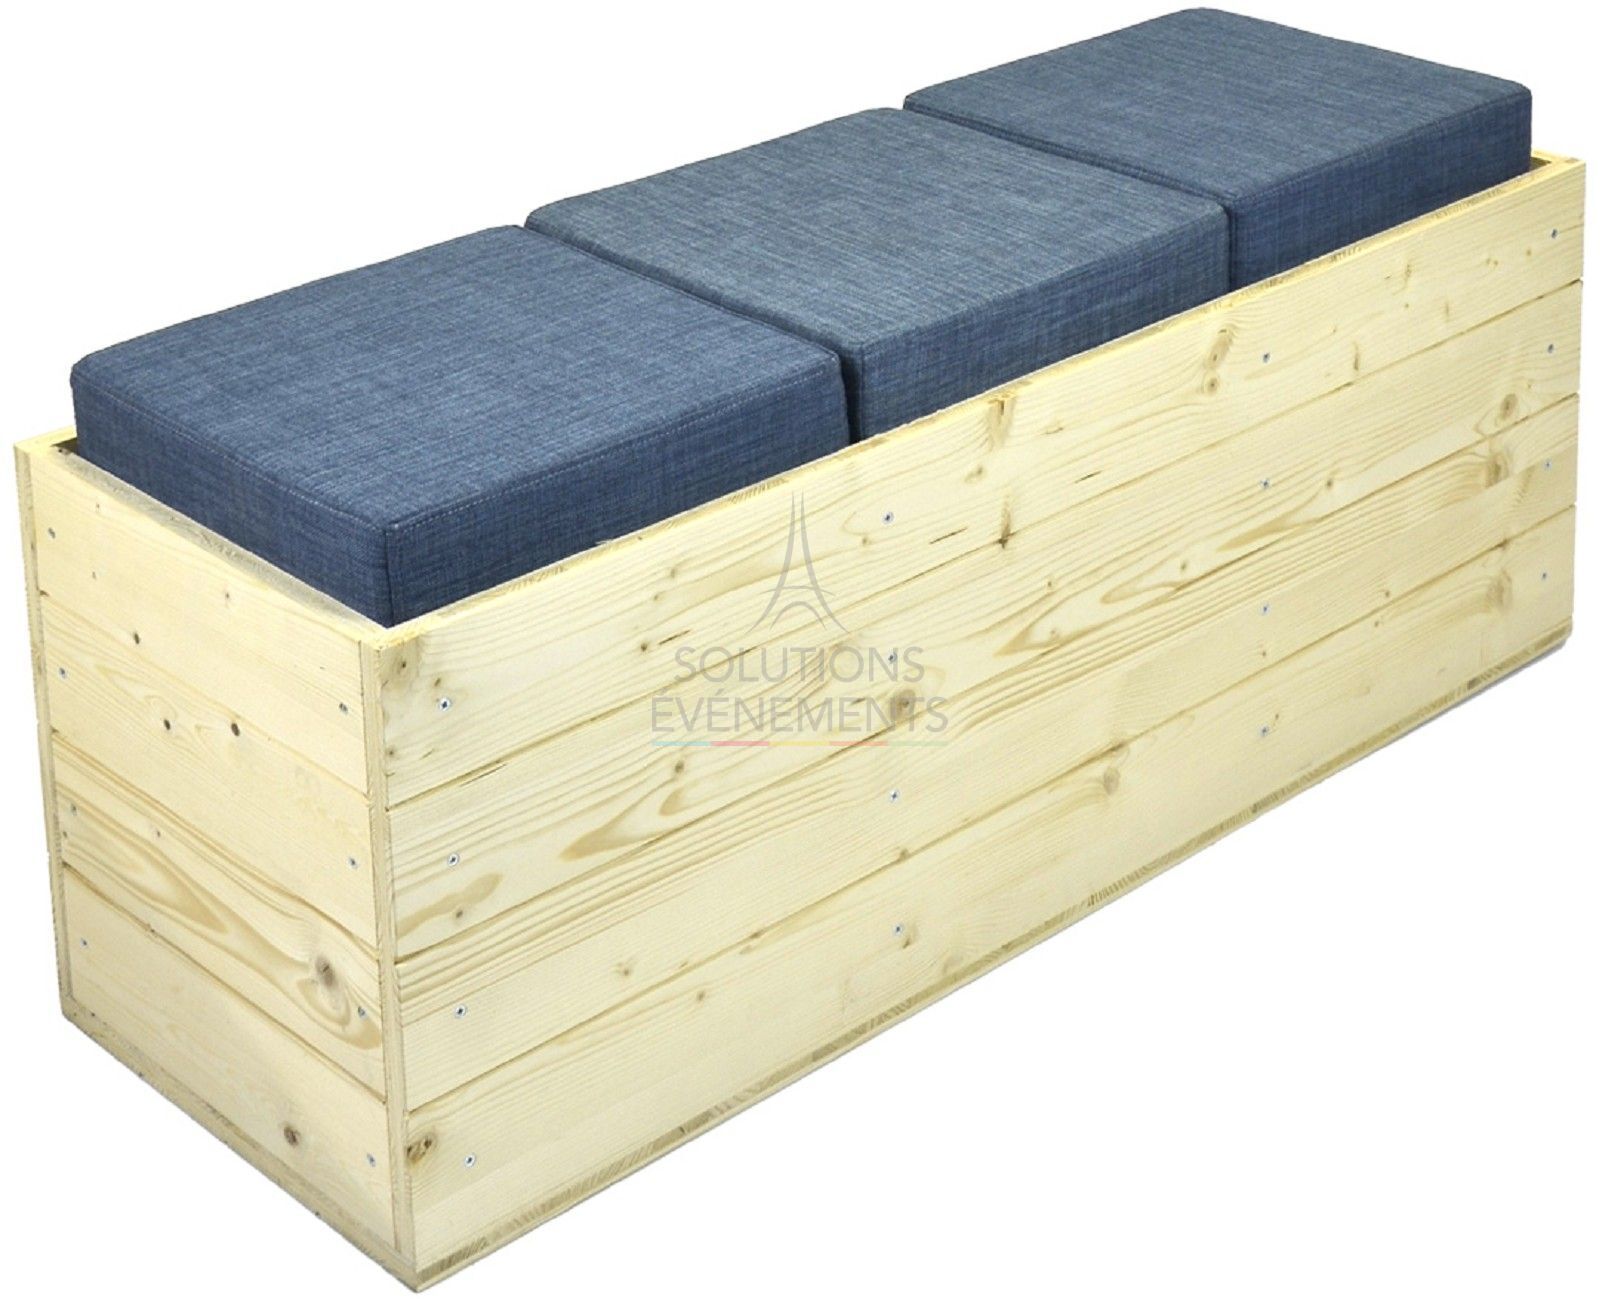 Rental eco-responsible wooden bench blue fabric